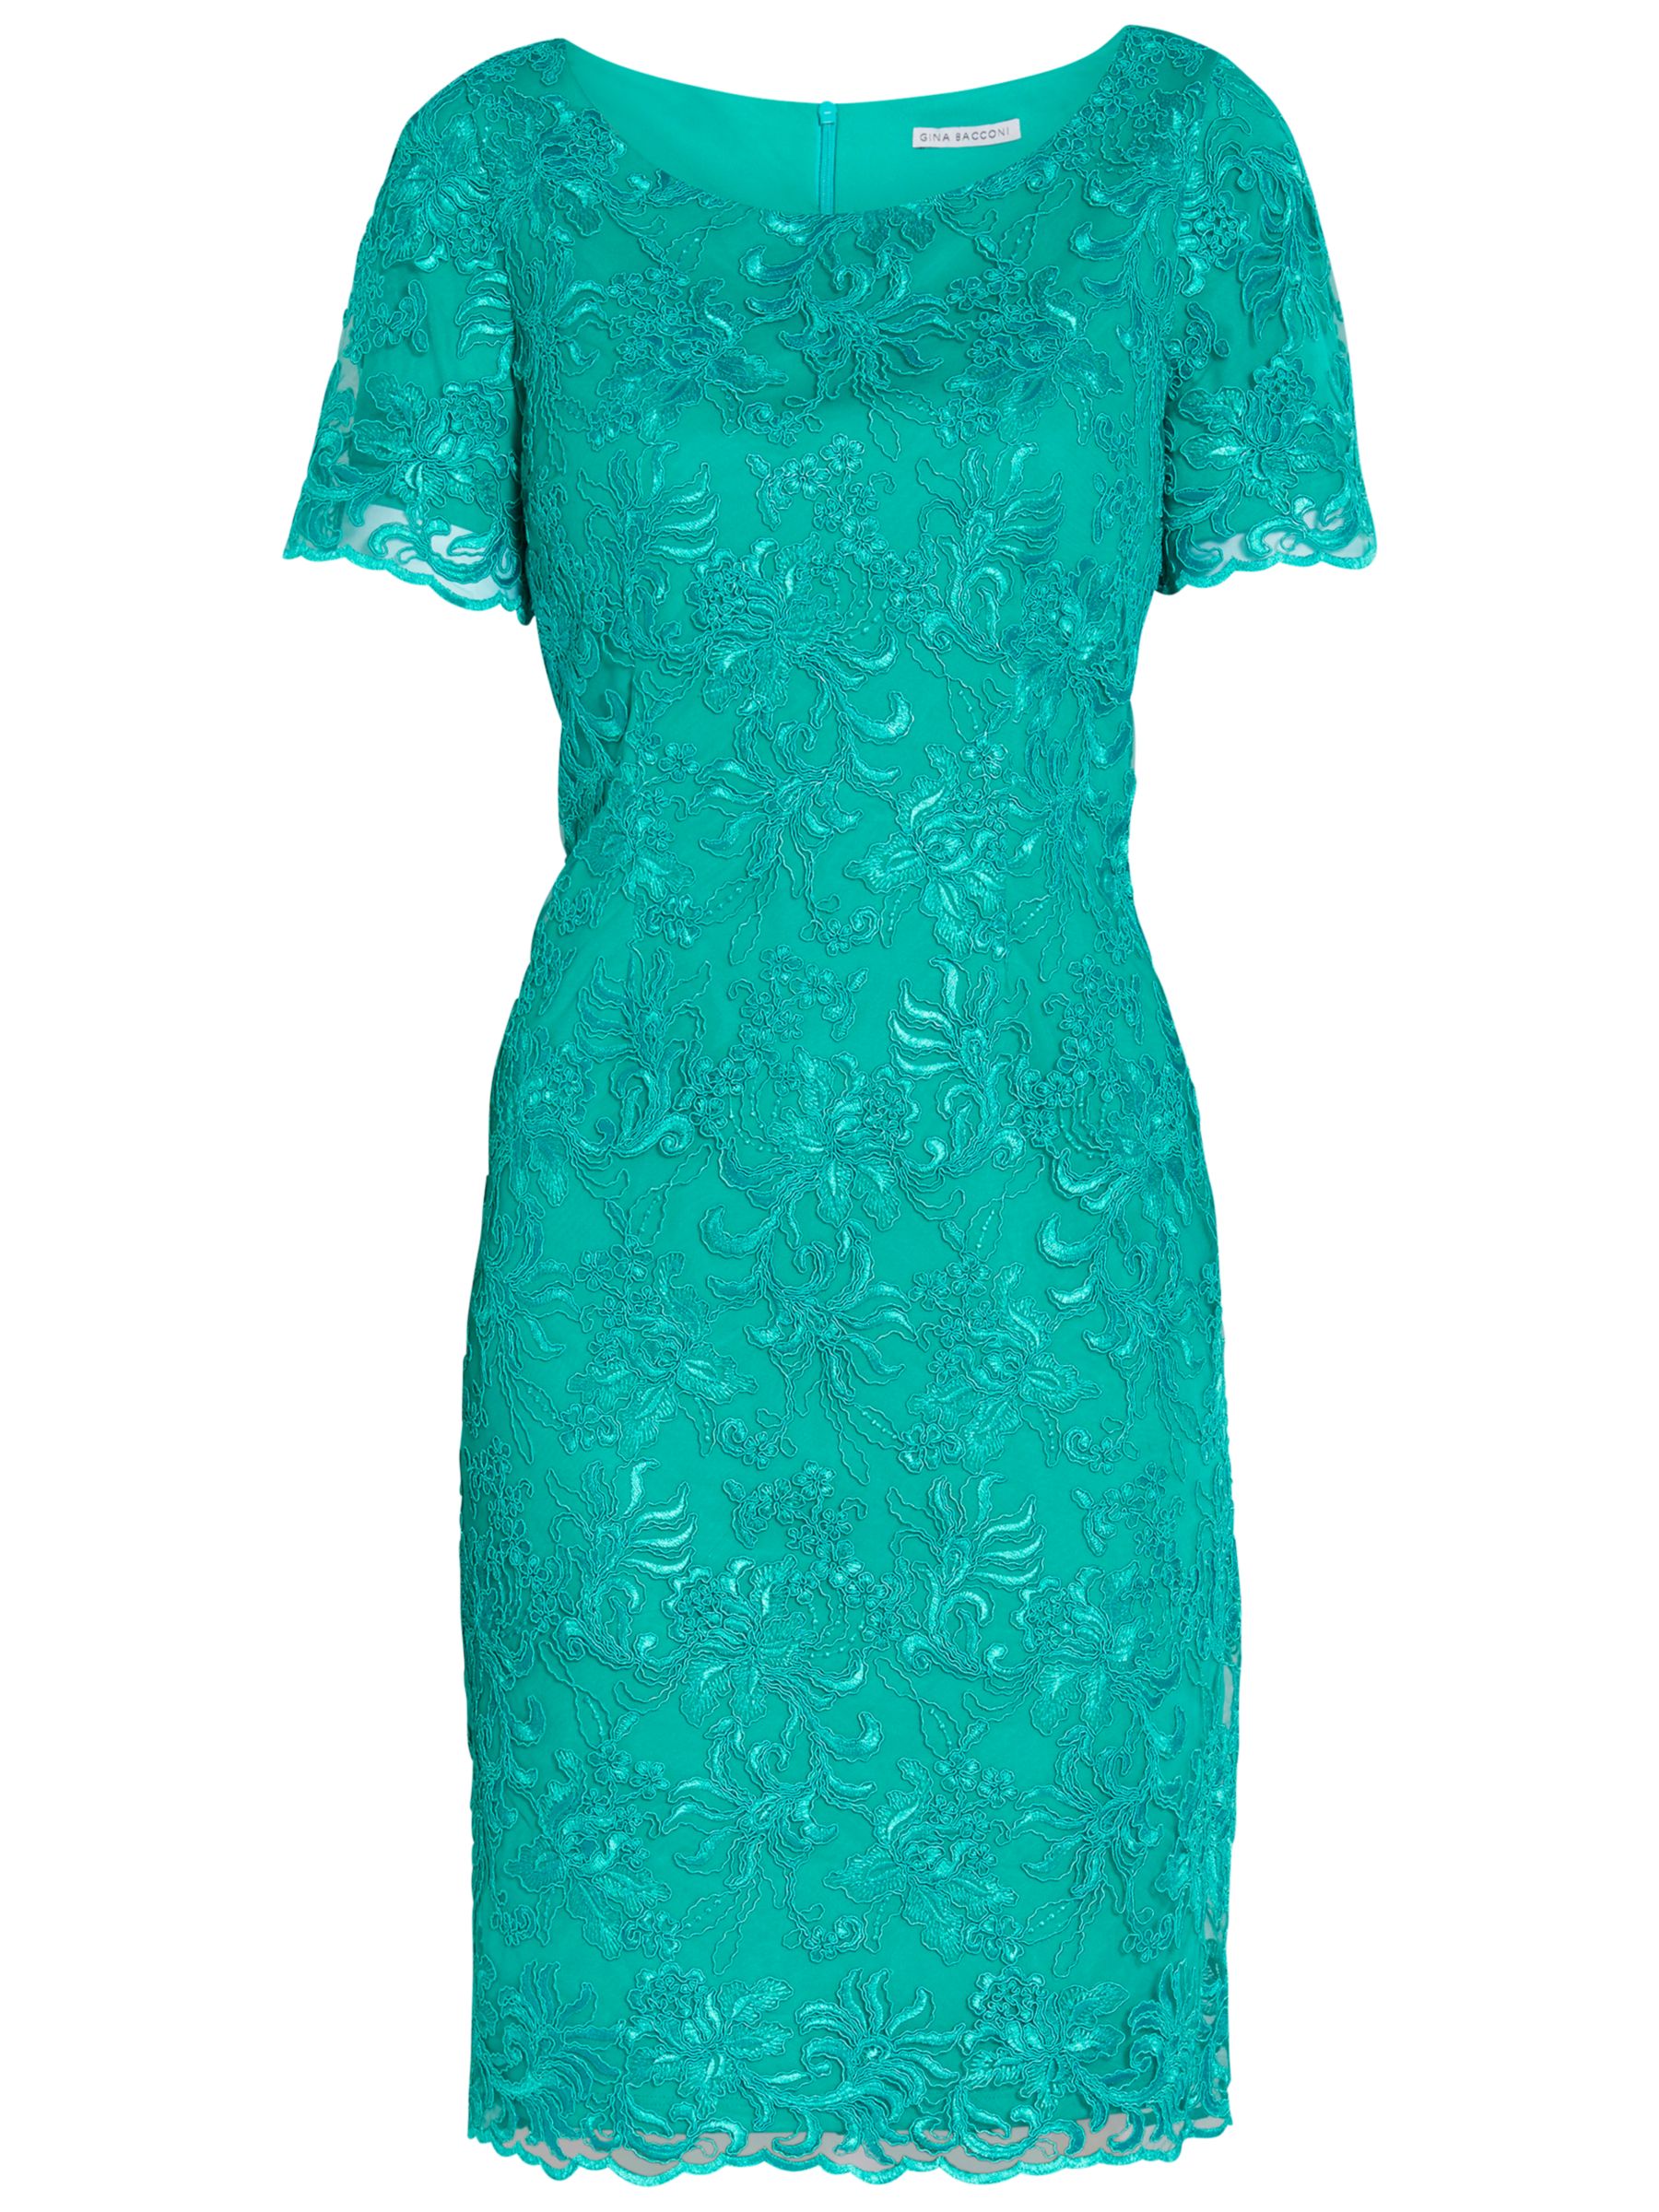 Gina Bacconi Embroidered Corded Dress, Summer Green, 8